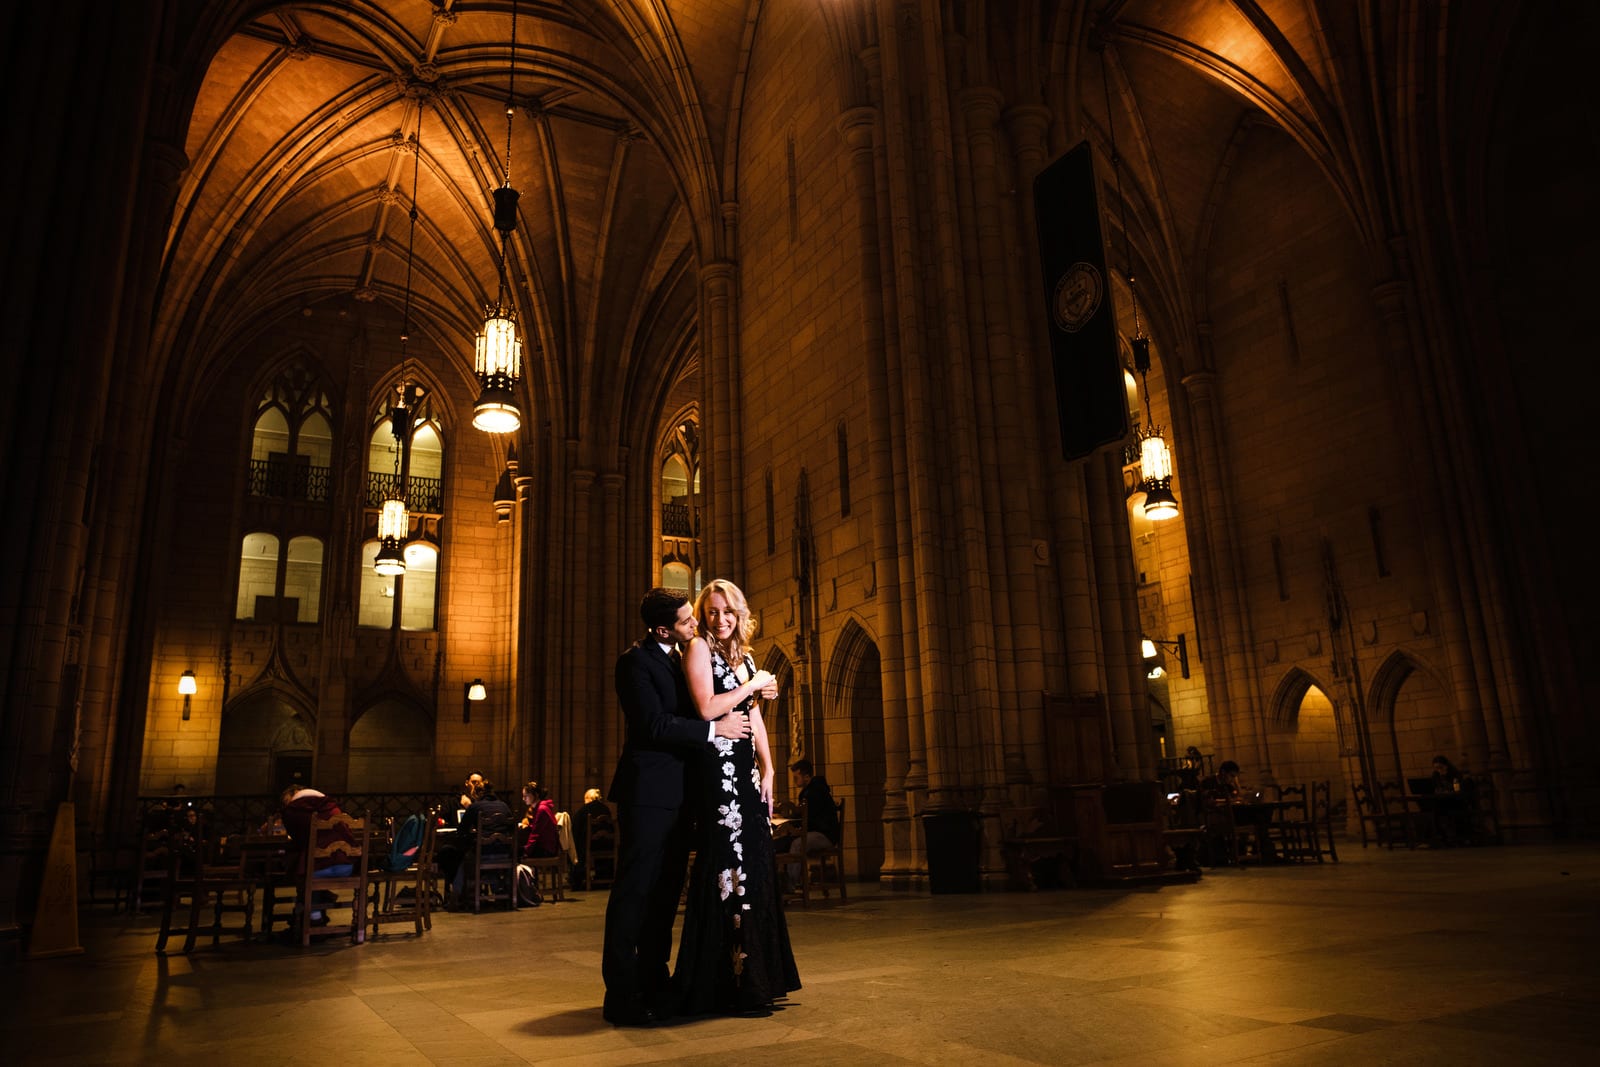 A couple embraces in the grand hall of the Cathedral of Learning during their University of Pittsburgh Engagement Portraits session.